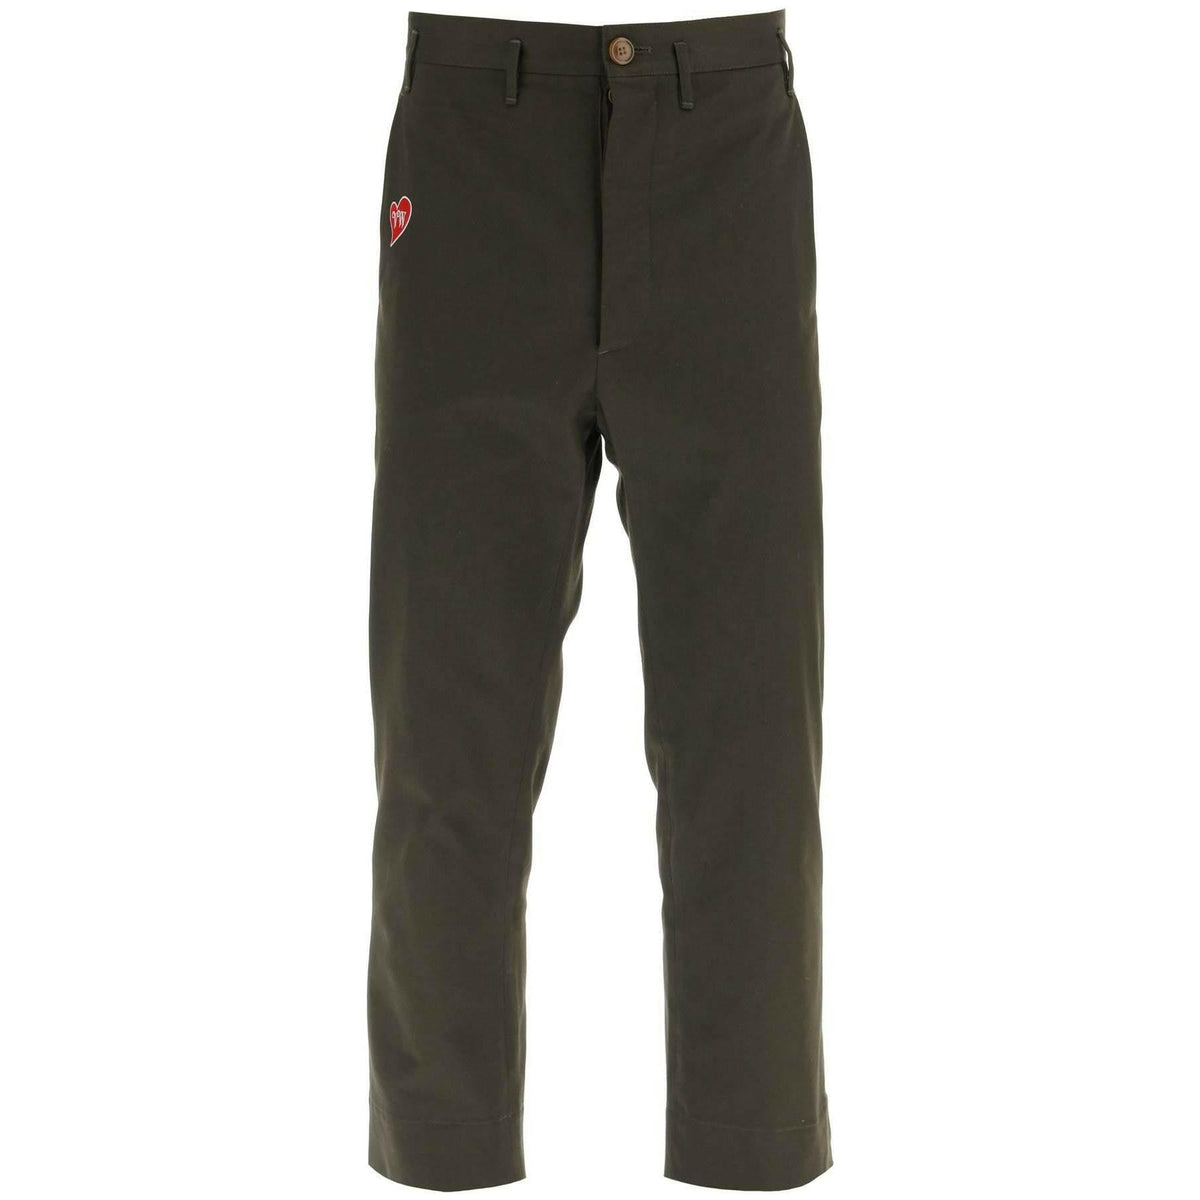 VIVIENNE WESTWOOD - Cropped Cruise Pants Featuring Embroidered Heart Shaped Logo - JOHN JULIA